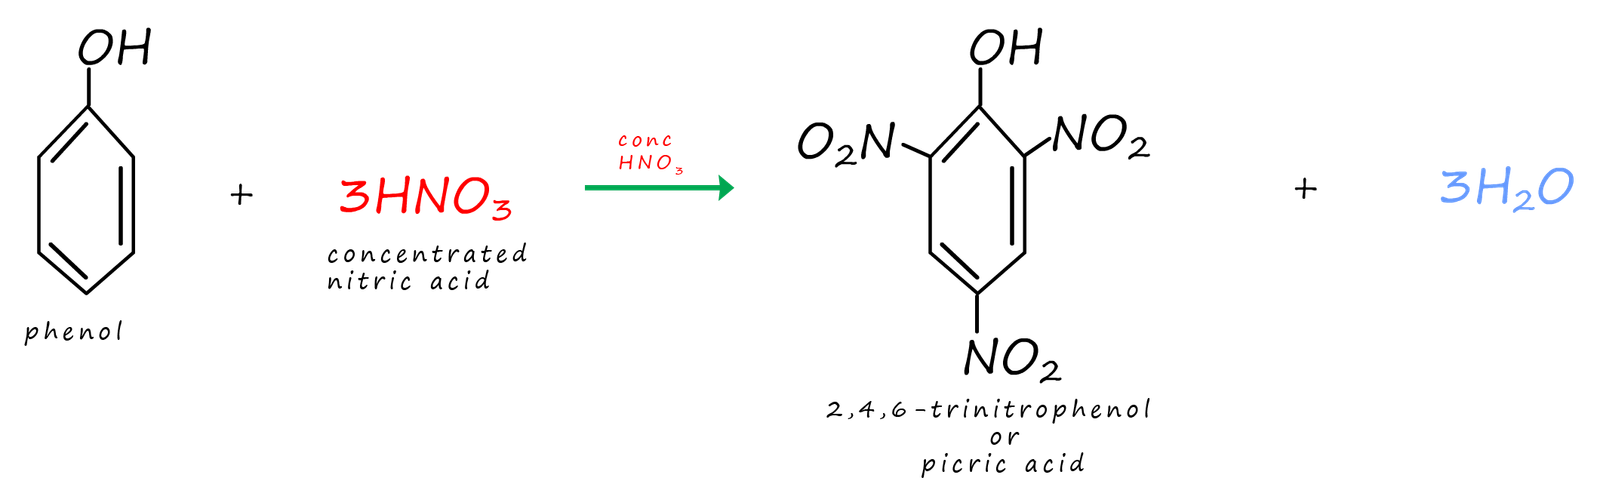 equations for reaction of phenol and nitric acid